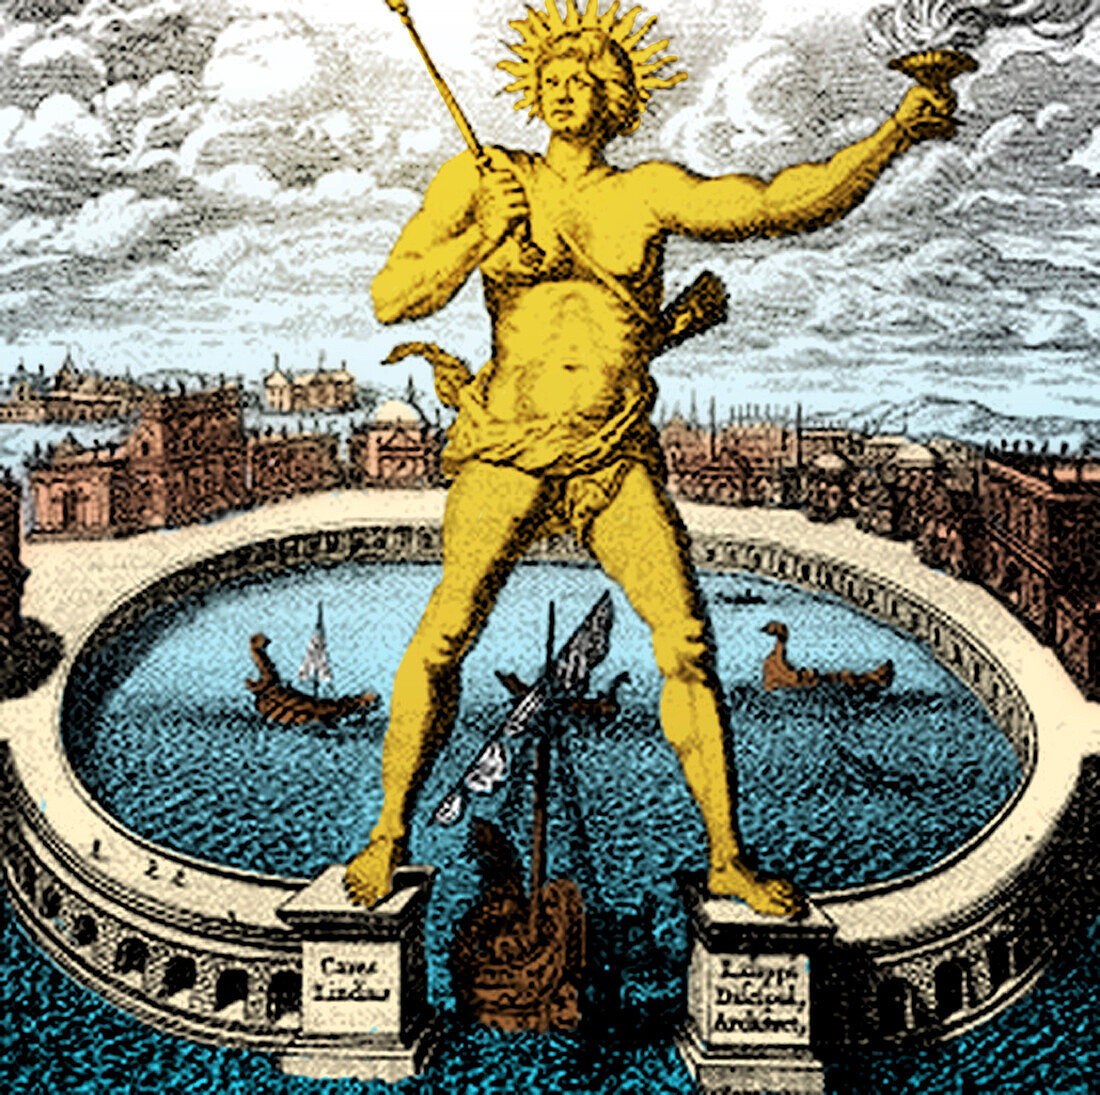 Ancient Wonder of the World, Colossus of Rhodes